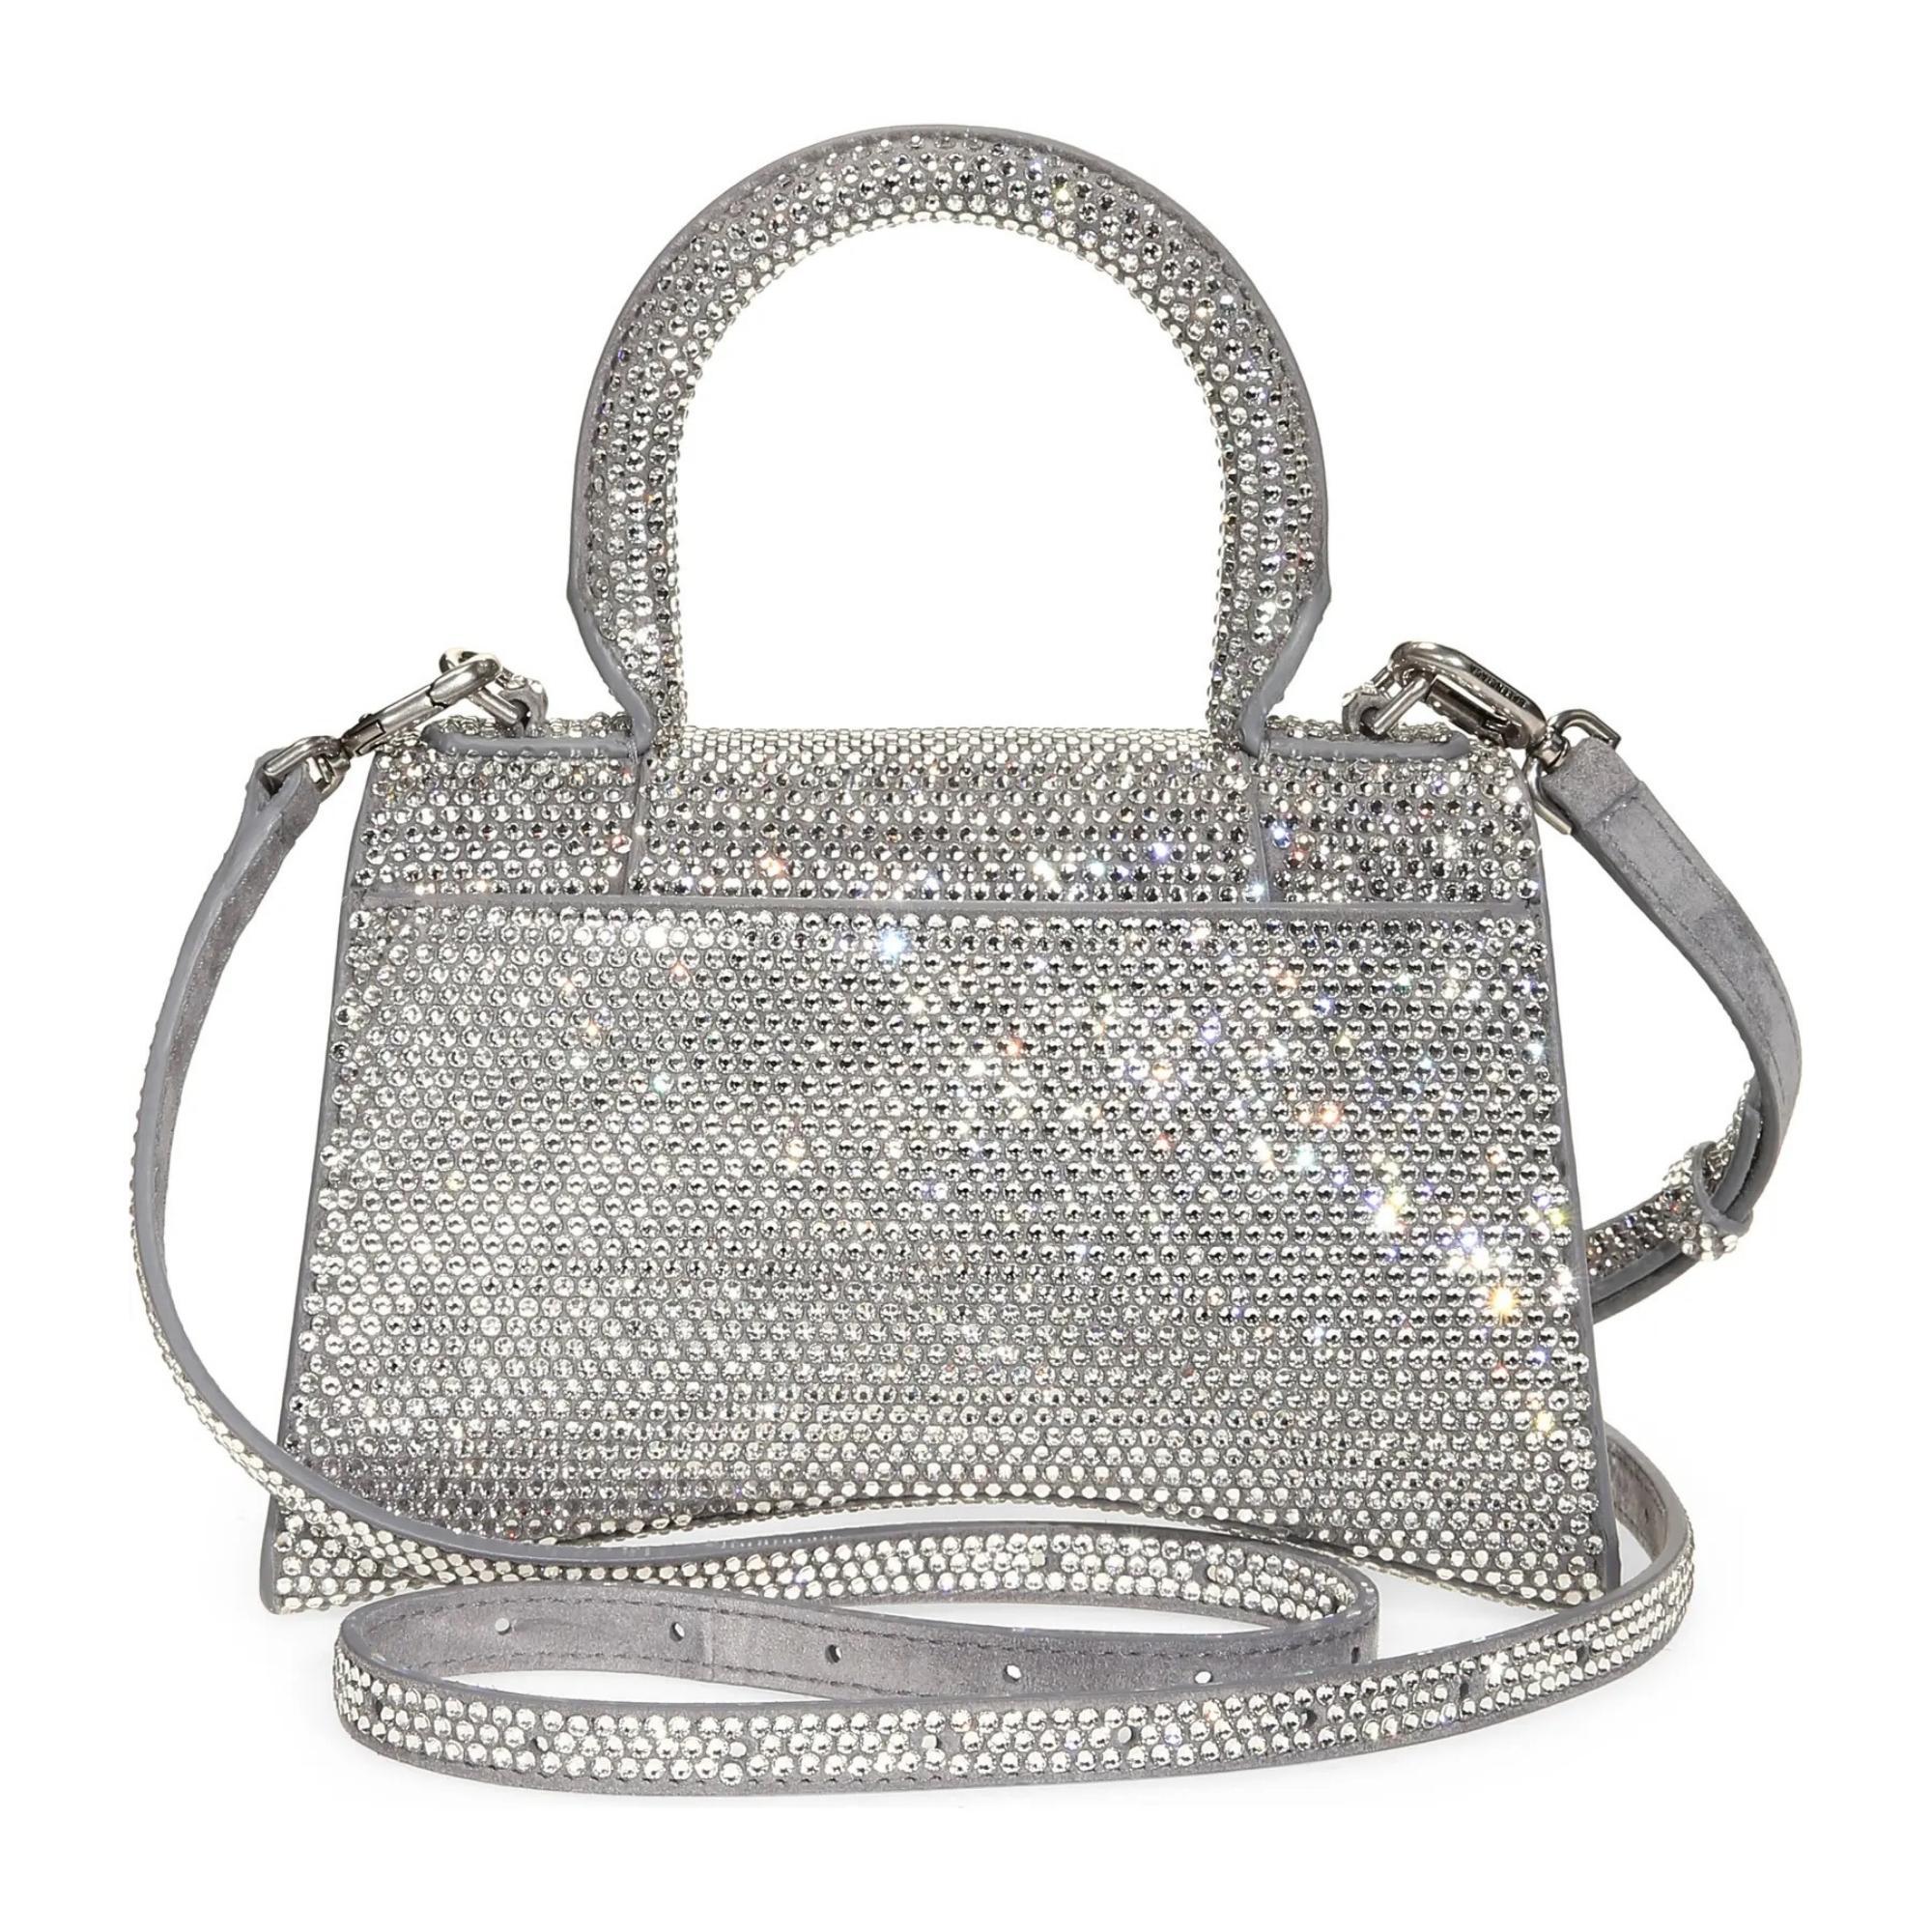 First launched in 2019, the Hourglass bag has become an iconic Balenciaga hallmark. This rendition is constructed of smooth leather embellished with rows of shimmering crystals in silver. The bag features the classic B-shaped logo charm at the